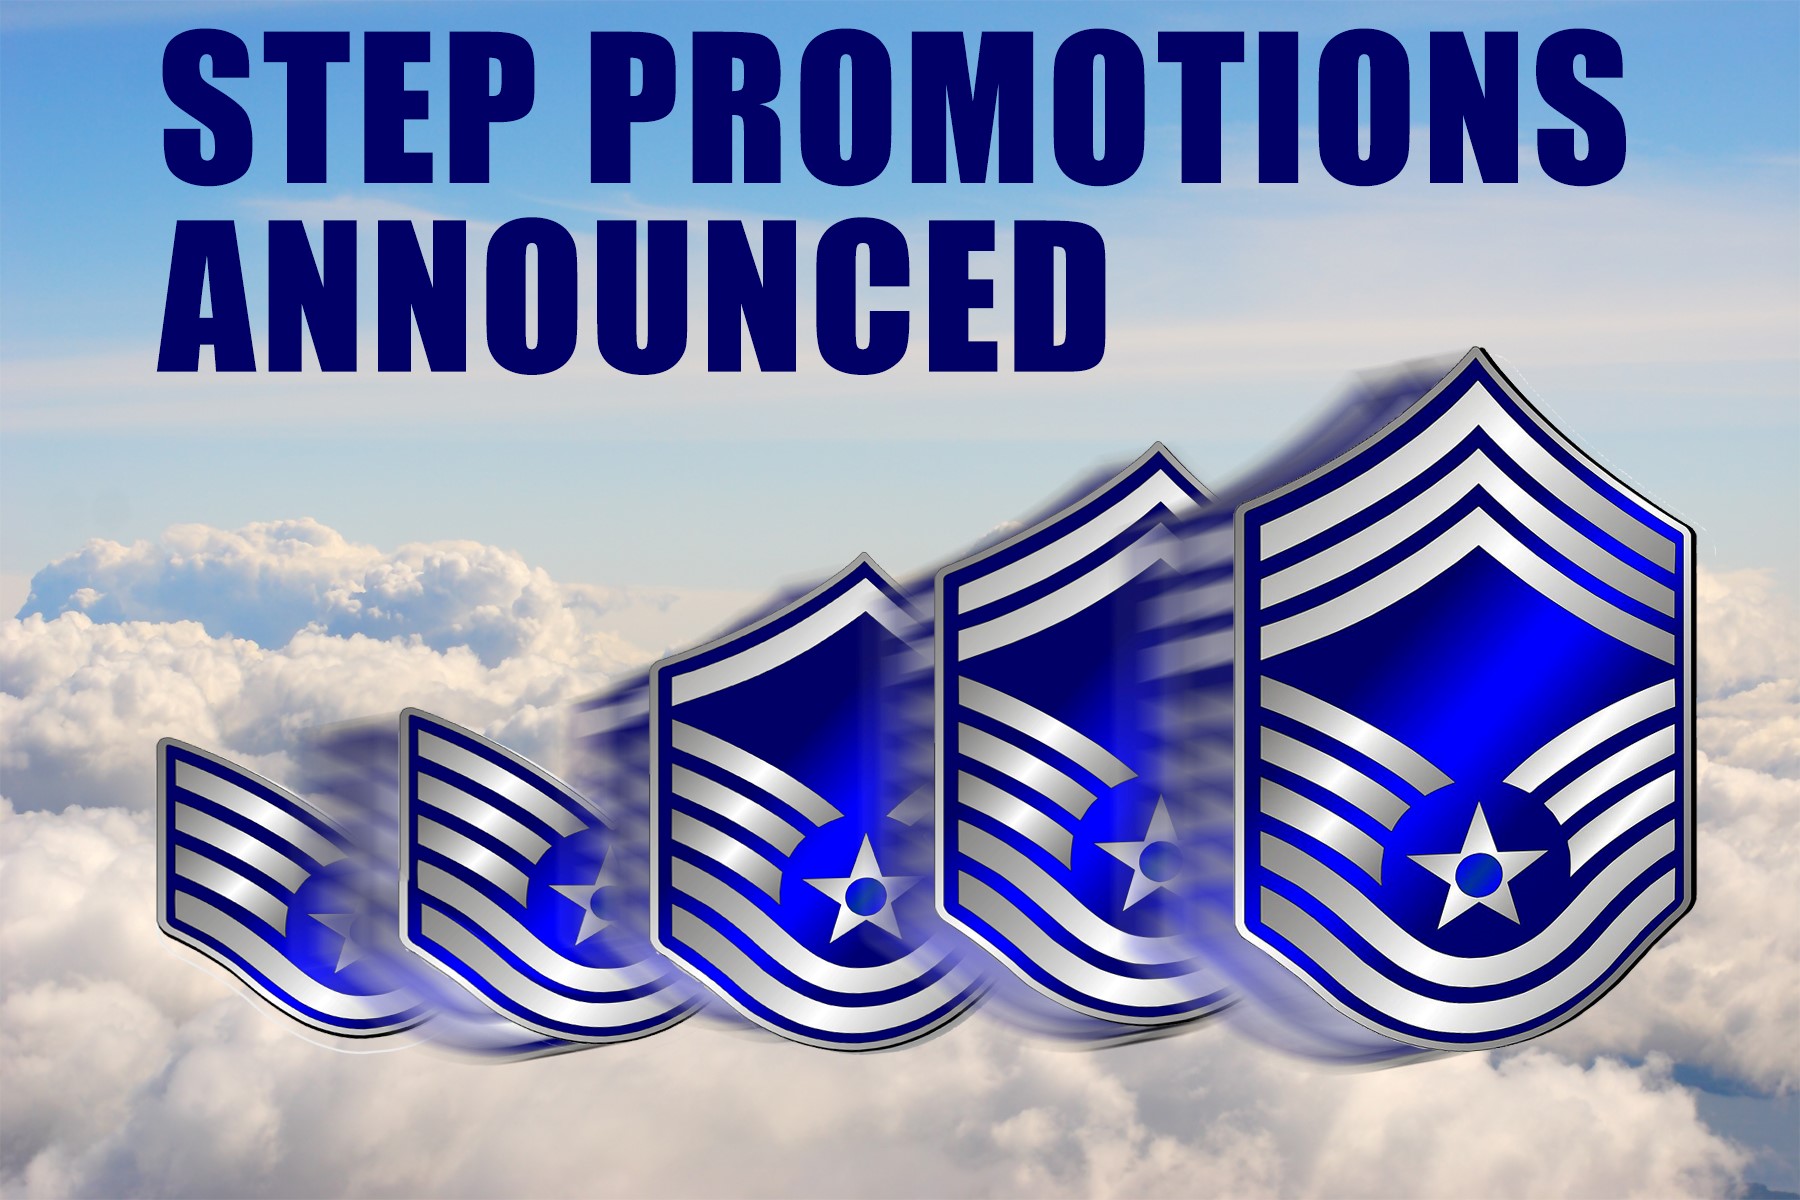 STEP Promotions Announced